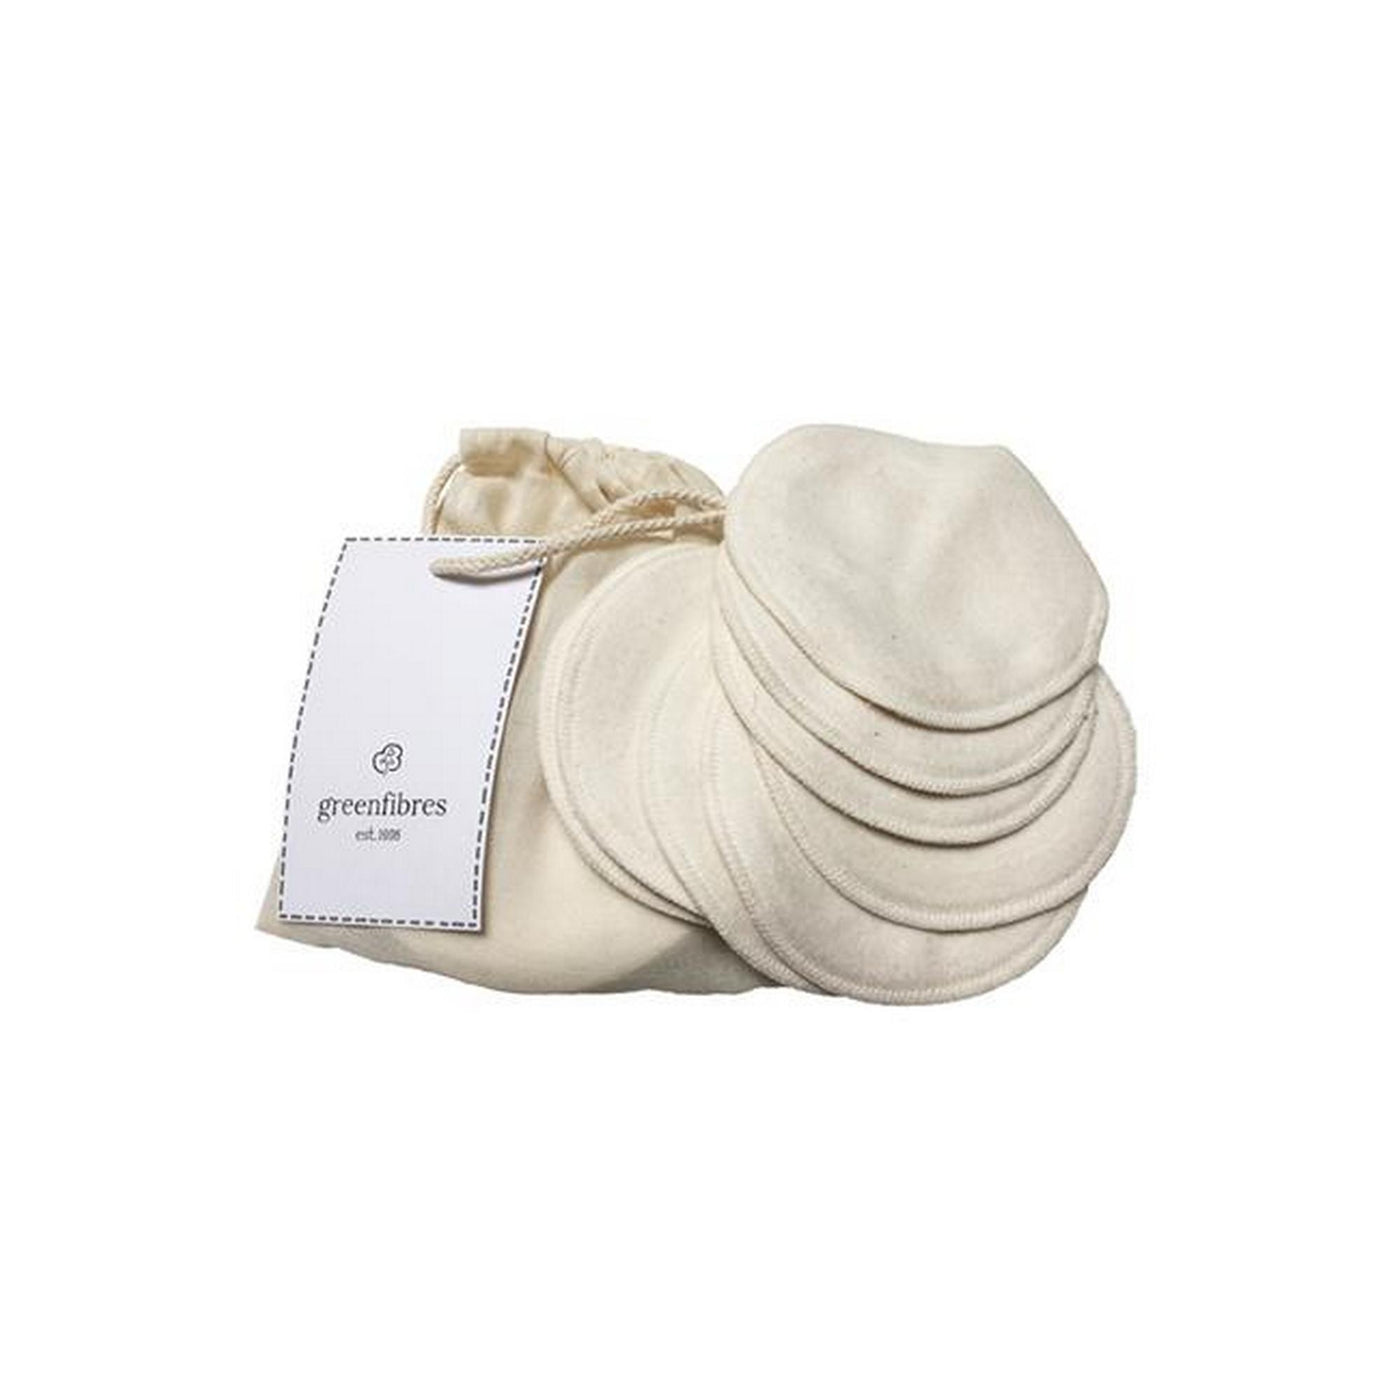 Greenfibres Organic Cotton Reusable Cleansing Pads with Bag 